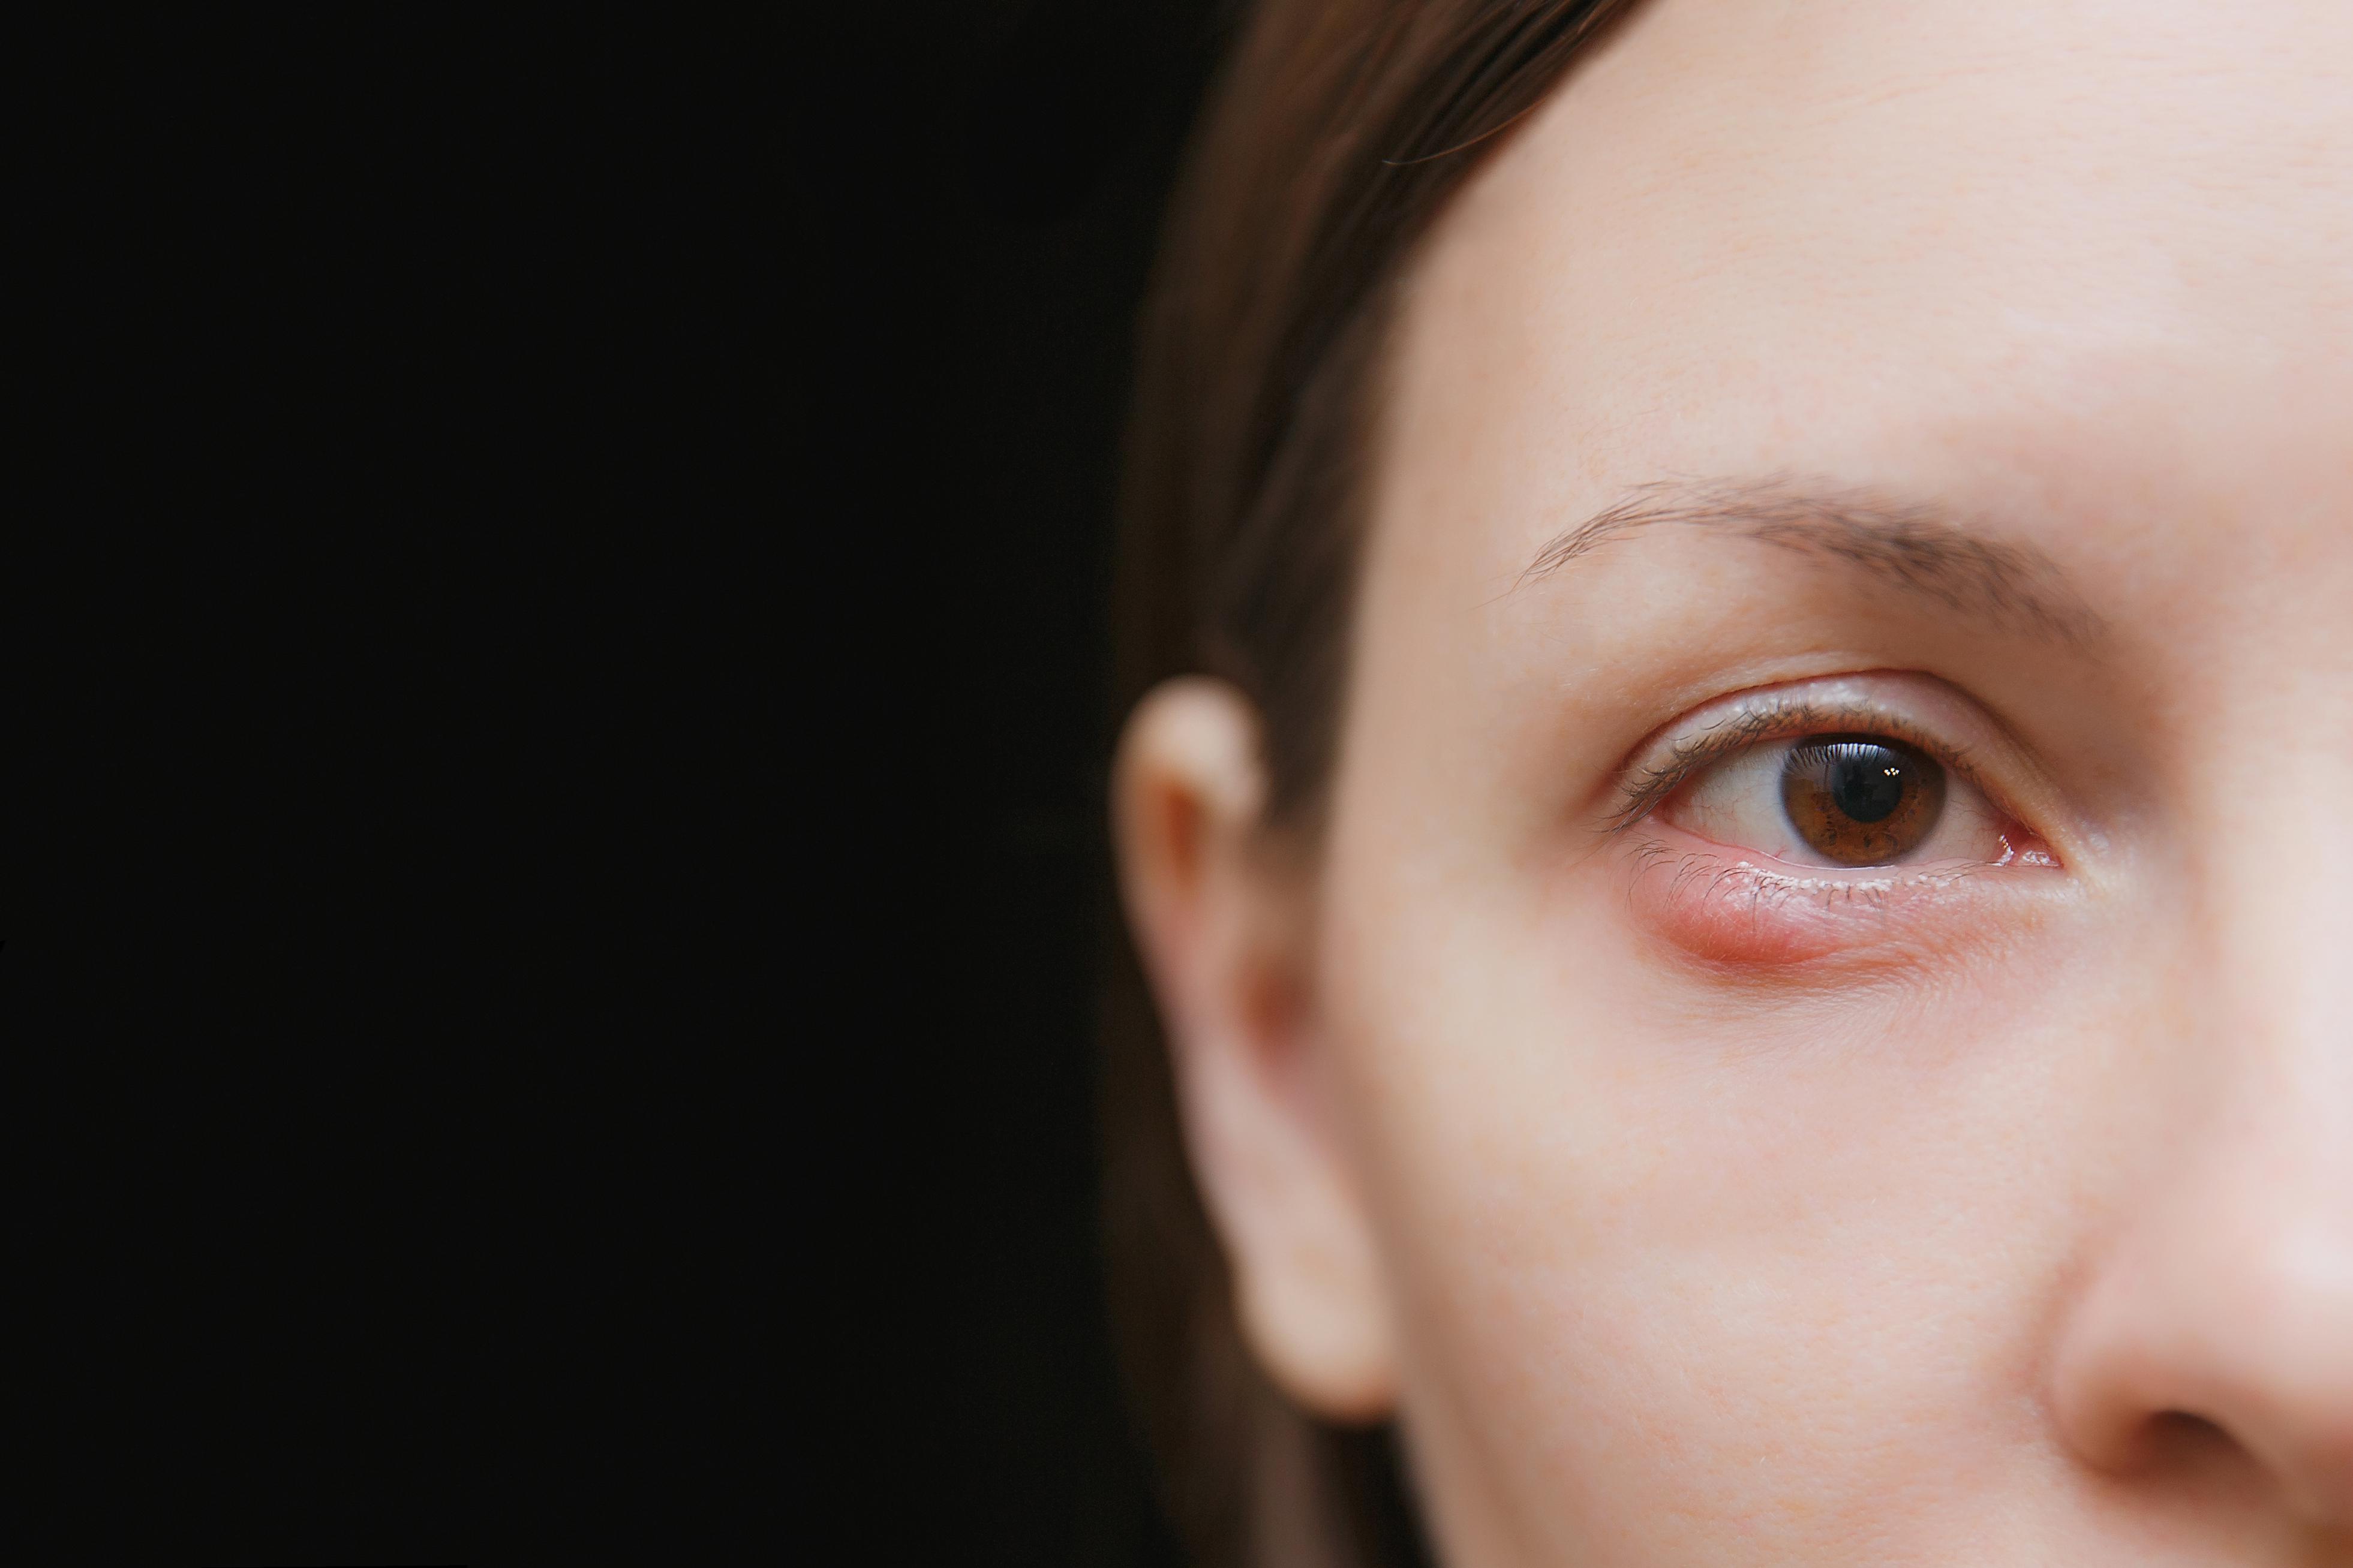 eye bacterial infection